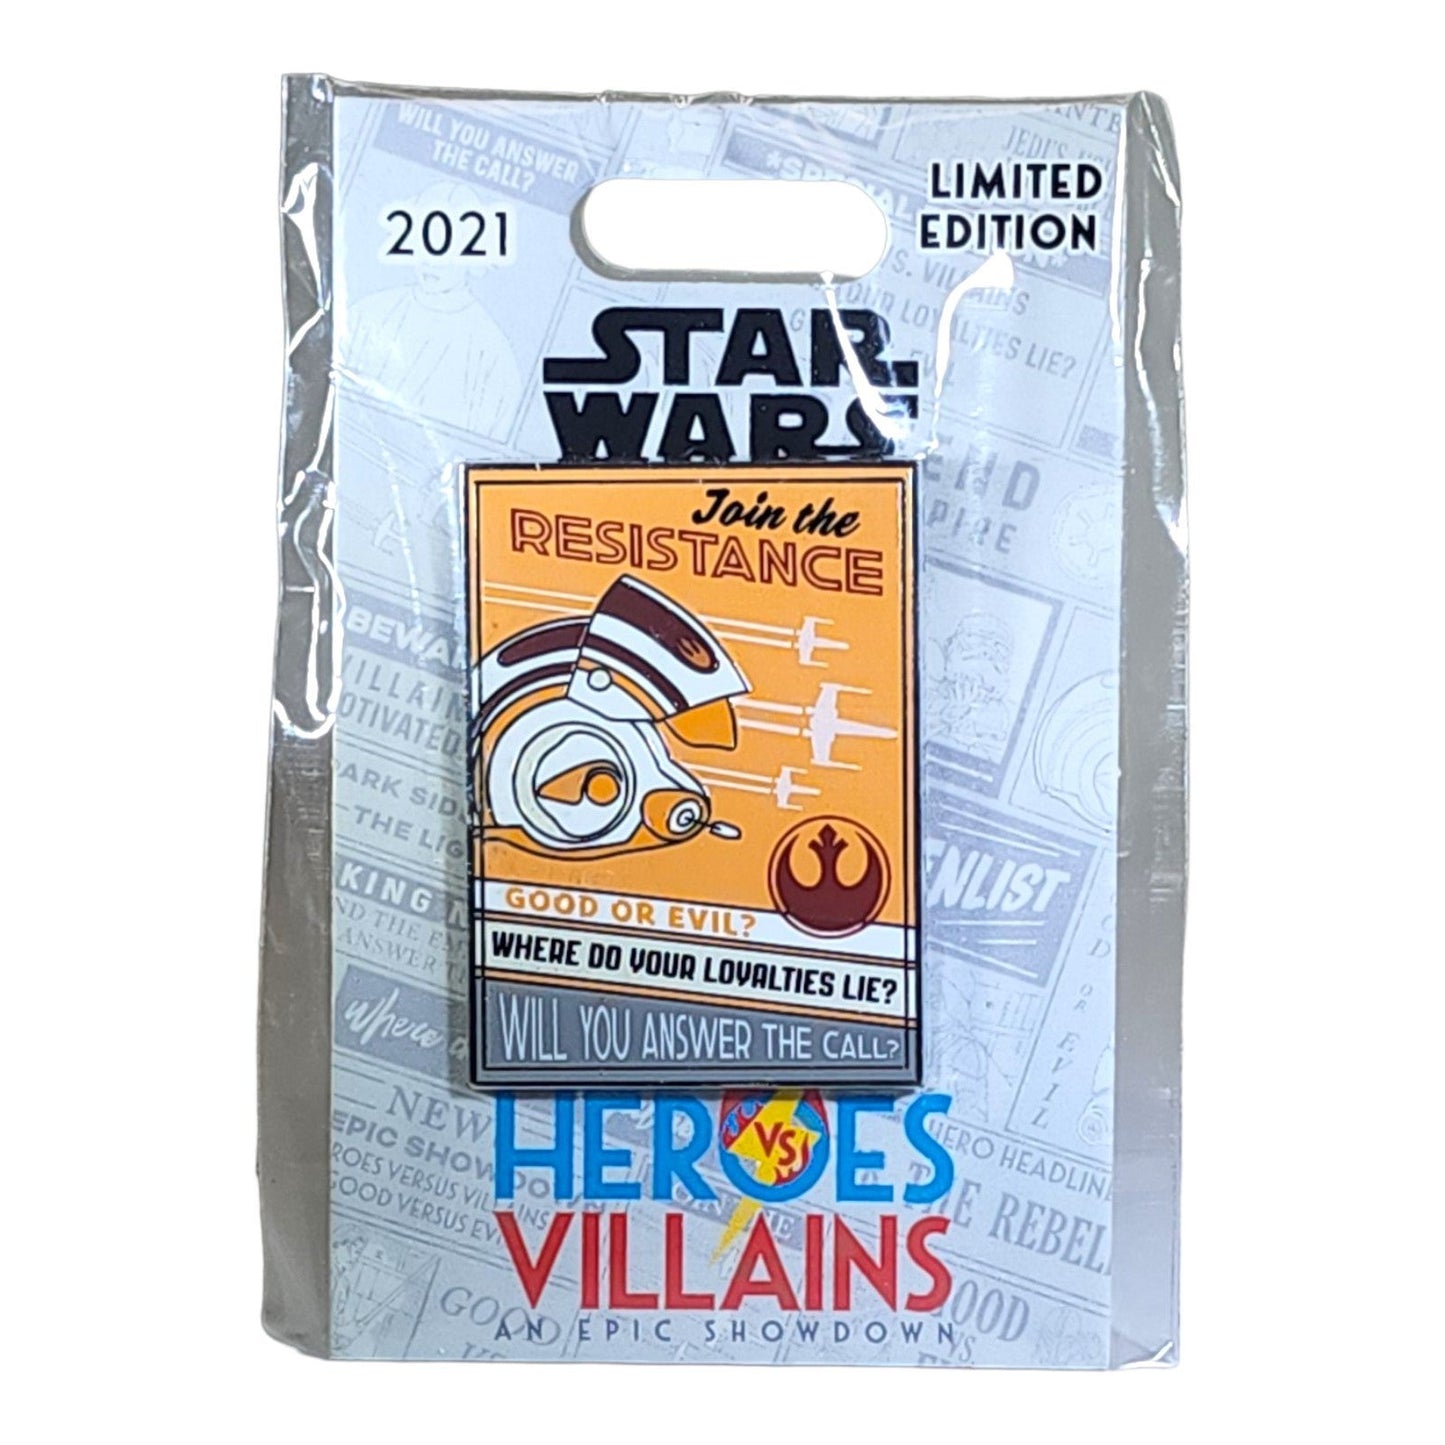 Star Wars Join the Resistance Recruitment Poster Series  - Heroes vs Villains Pin Event  - Limited Edition 2000